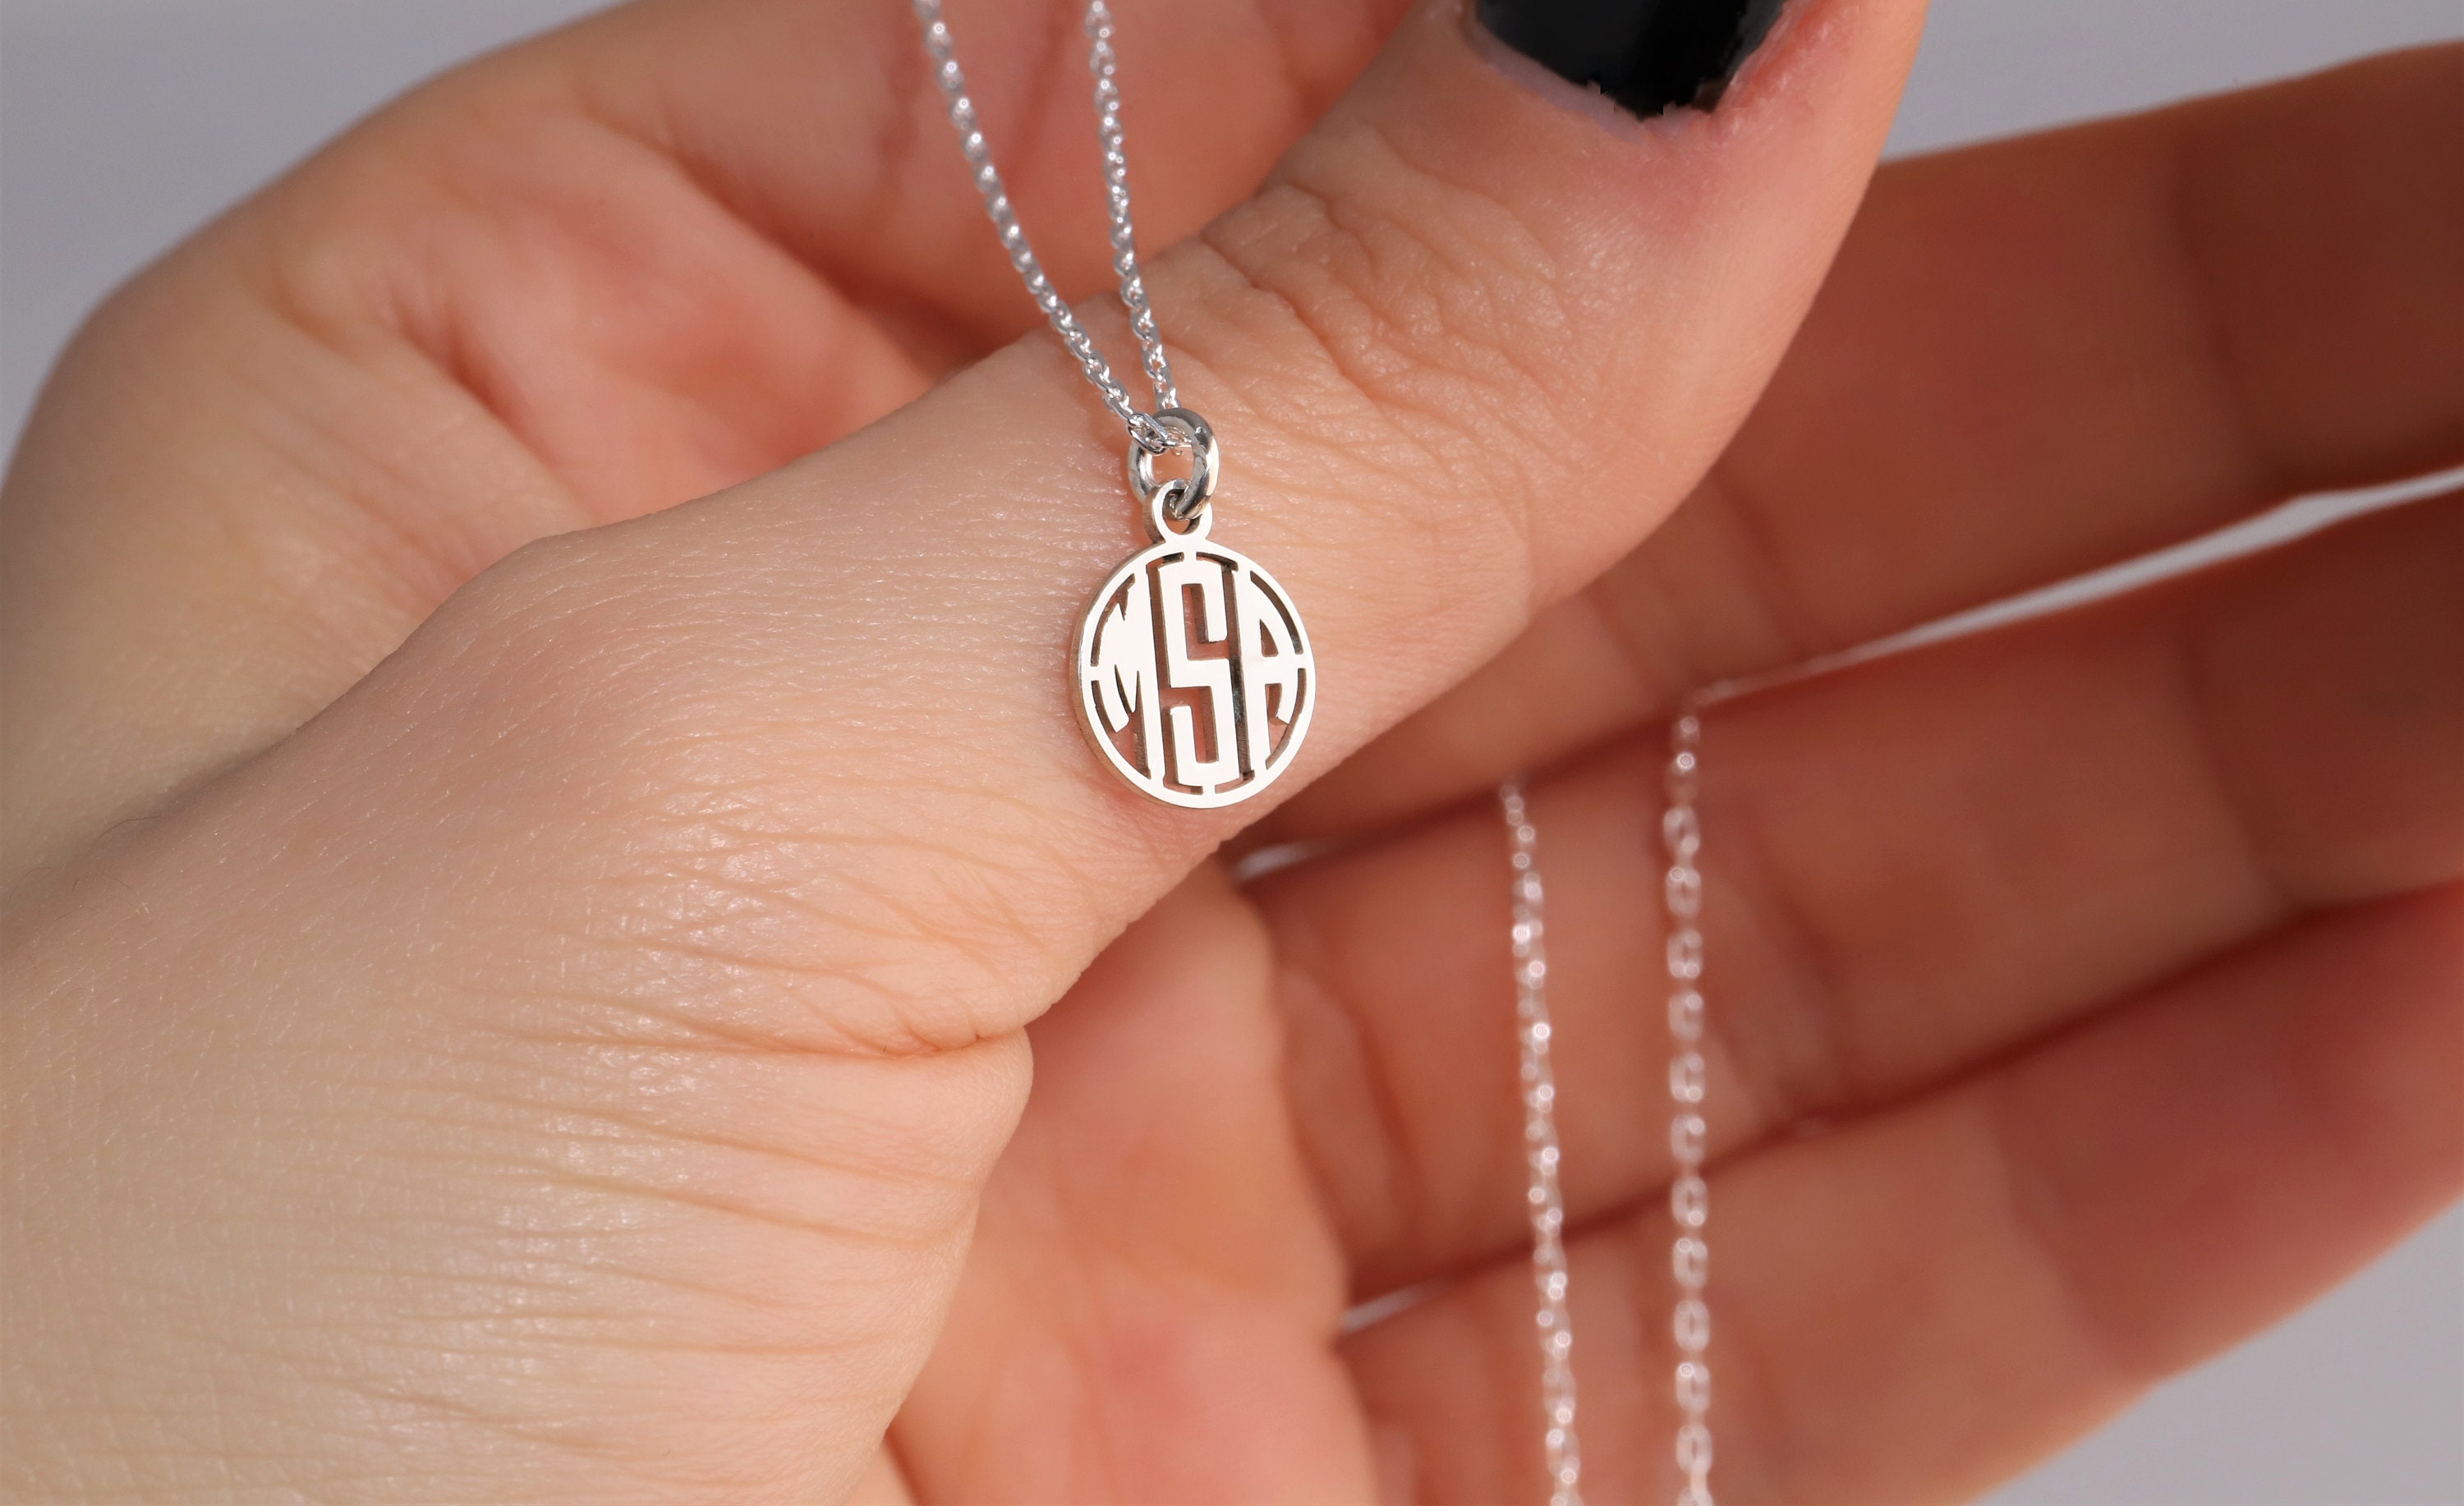 We always make sure that your monogram necklace is unique and made for